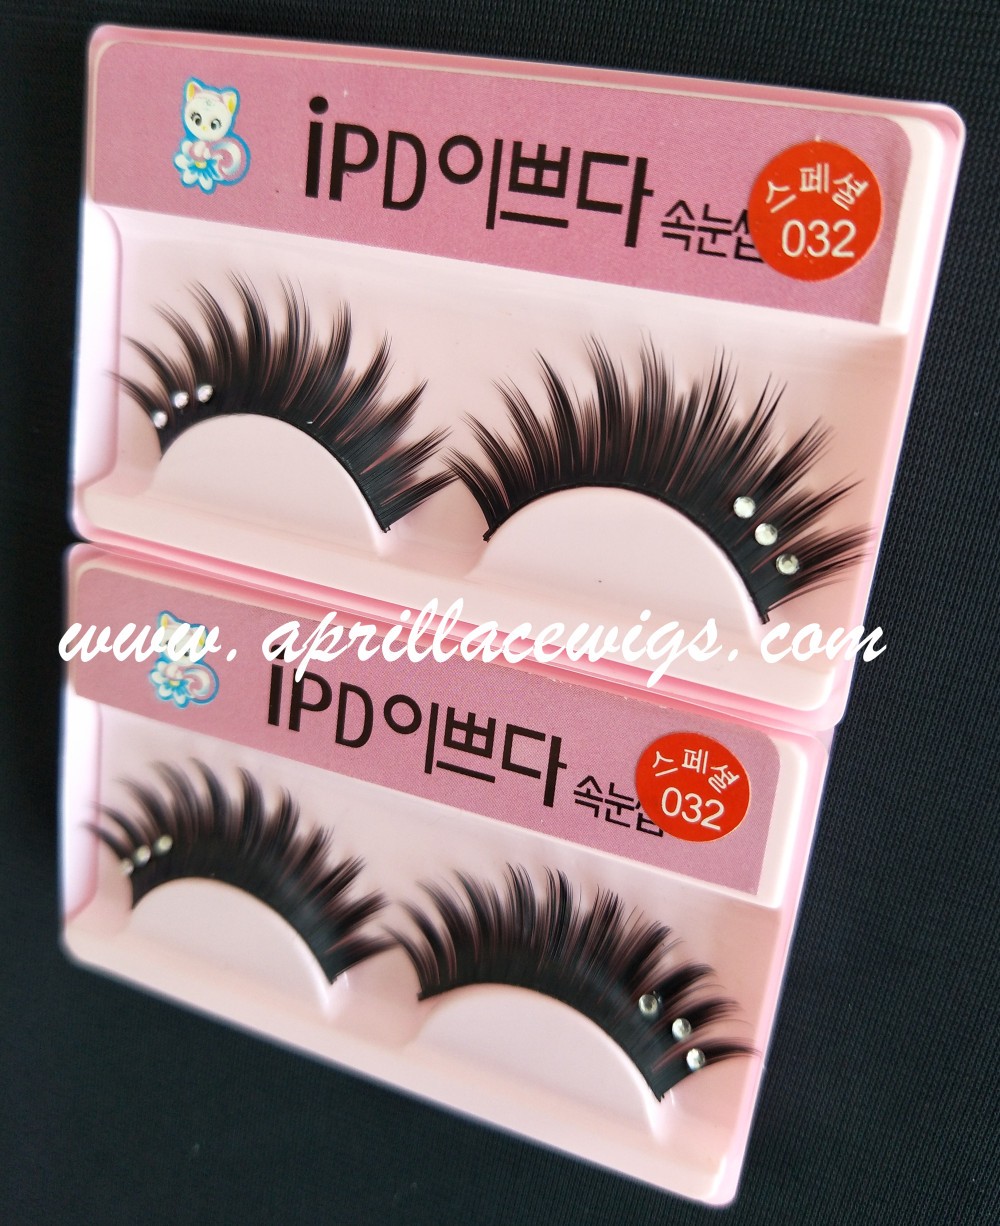 Thick Mink false eyelashes with rhinestone for party or cosplay